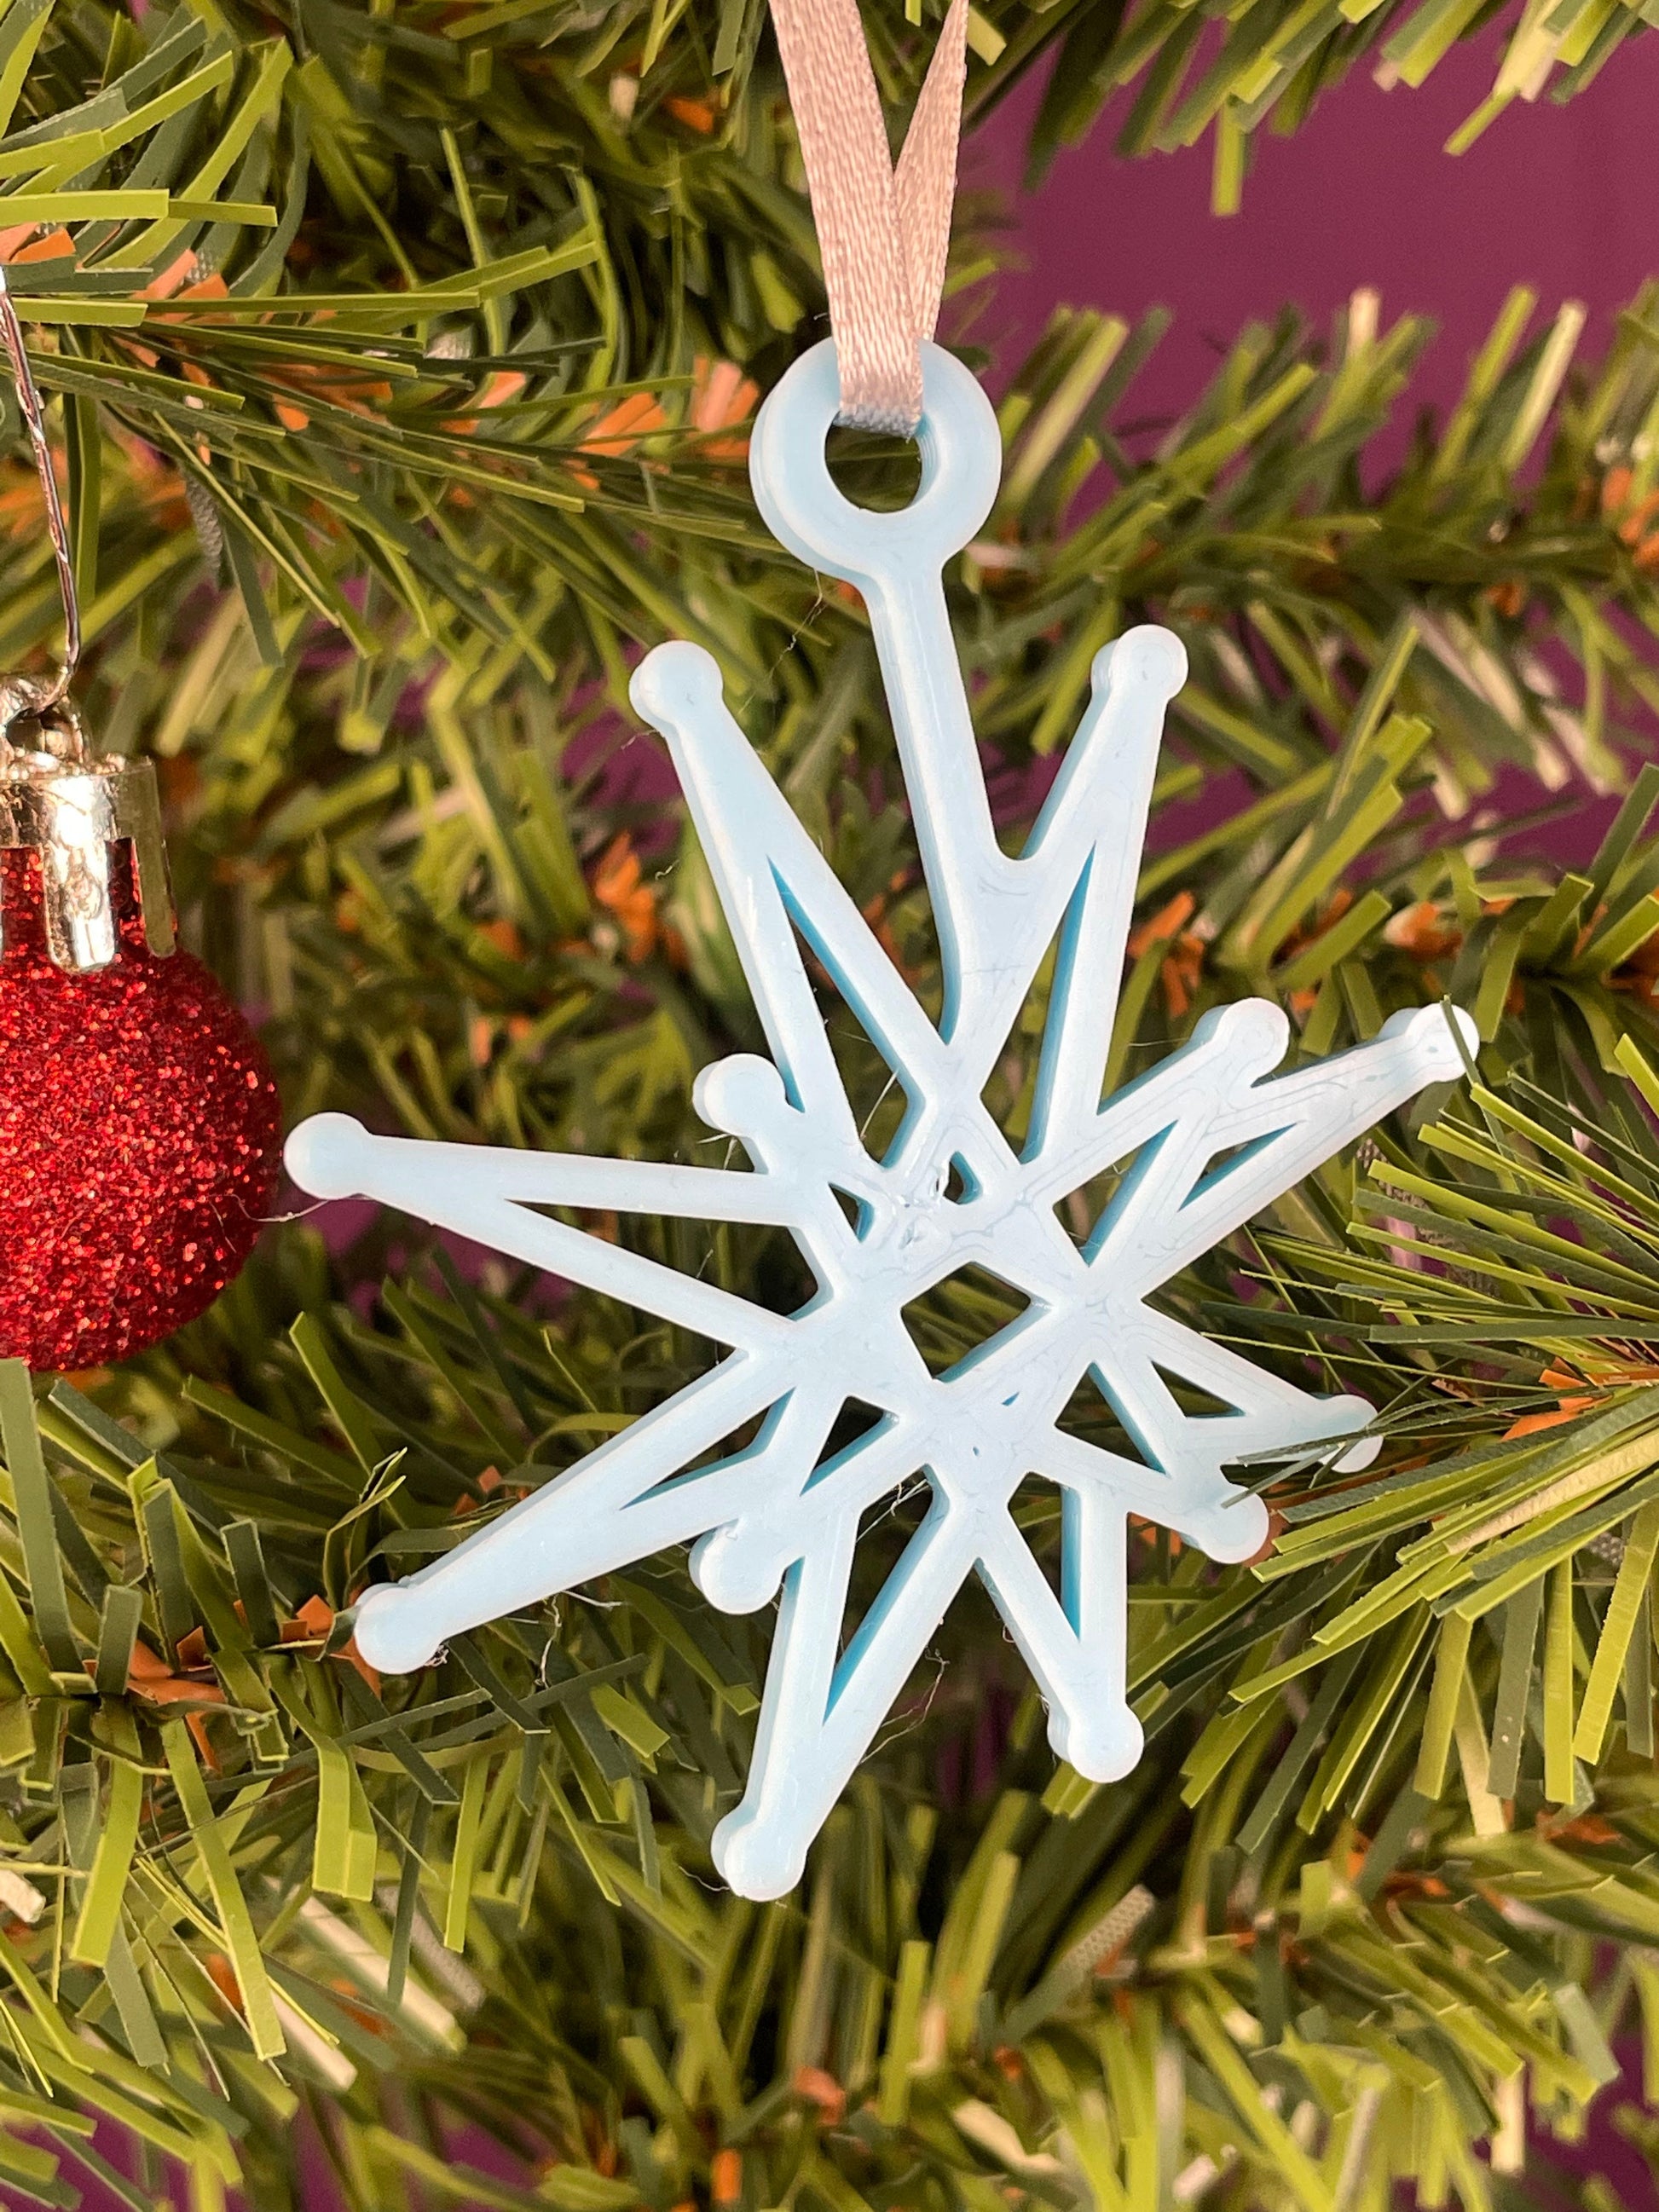 A close up of a fractal starburst ornament printed in light blue filament hung on a christmas tree with a purple background.